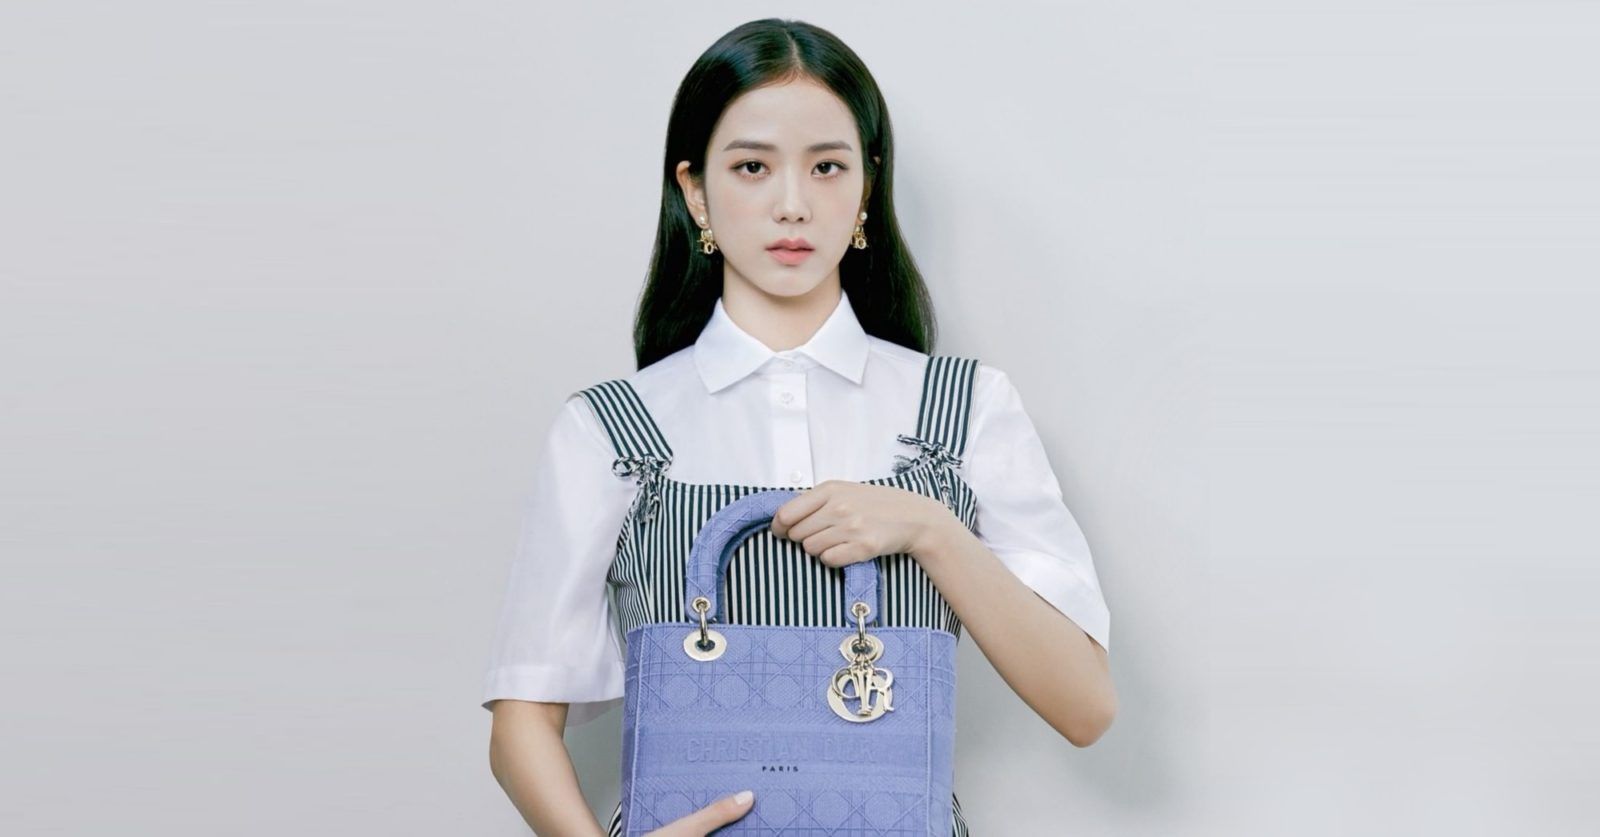 The best Dior bags in Jisoo of Blackpink’s personal collection